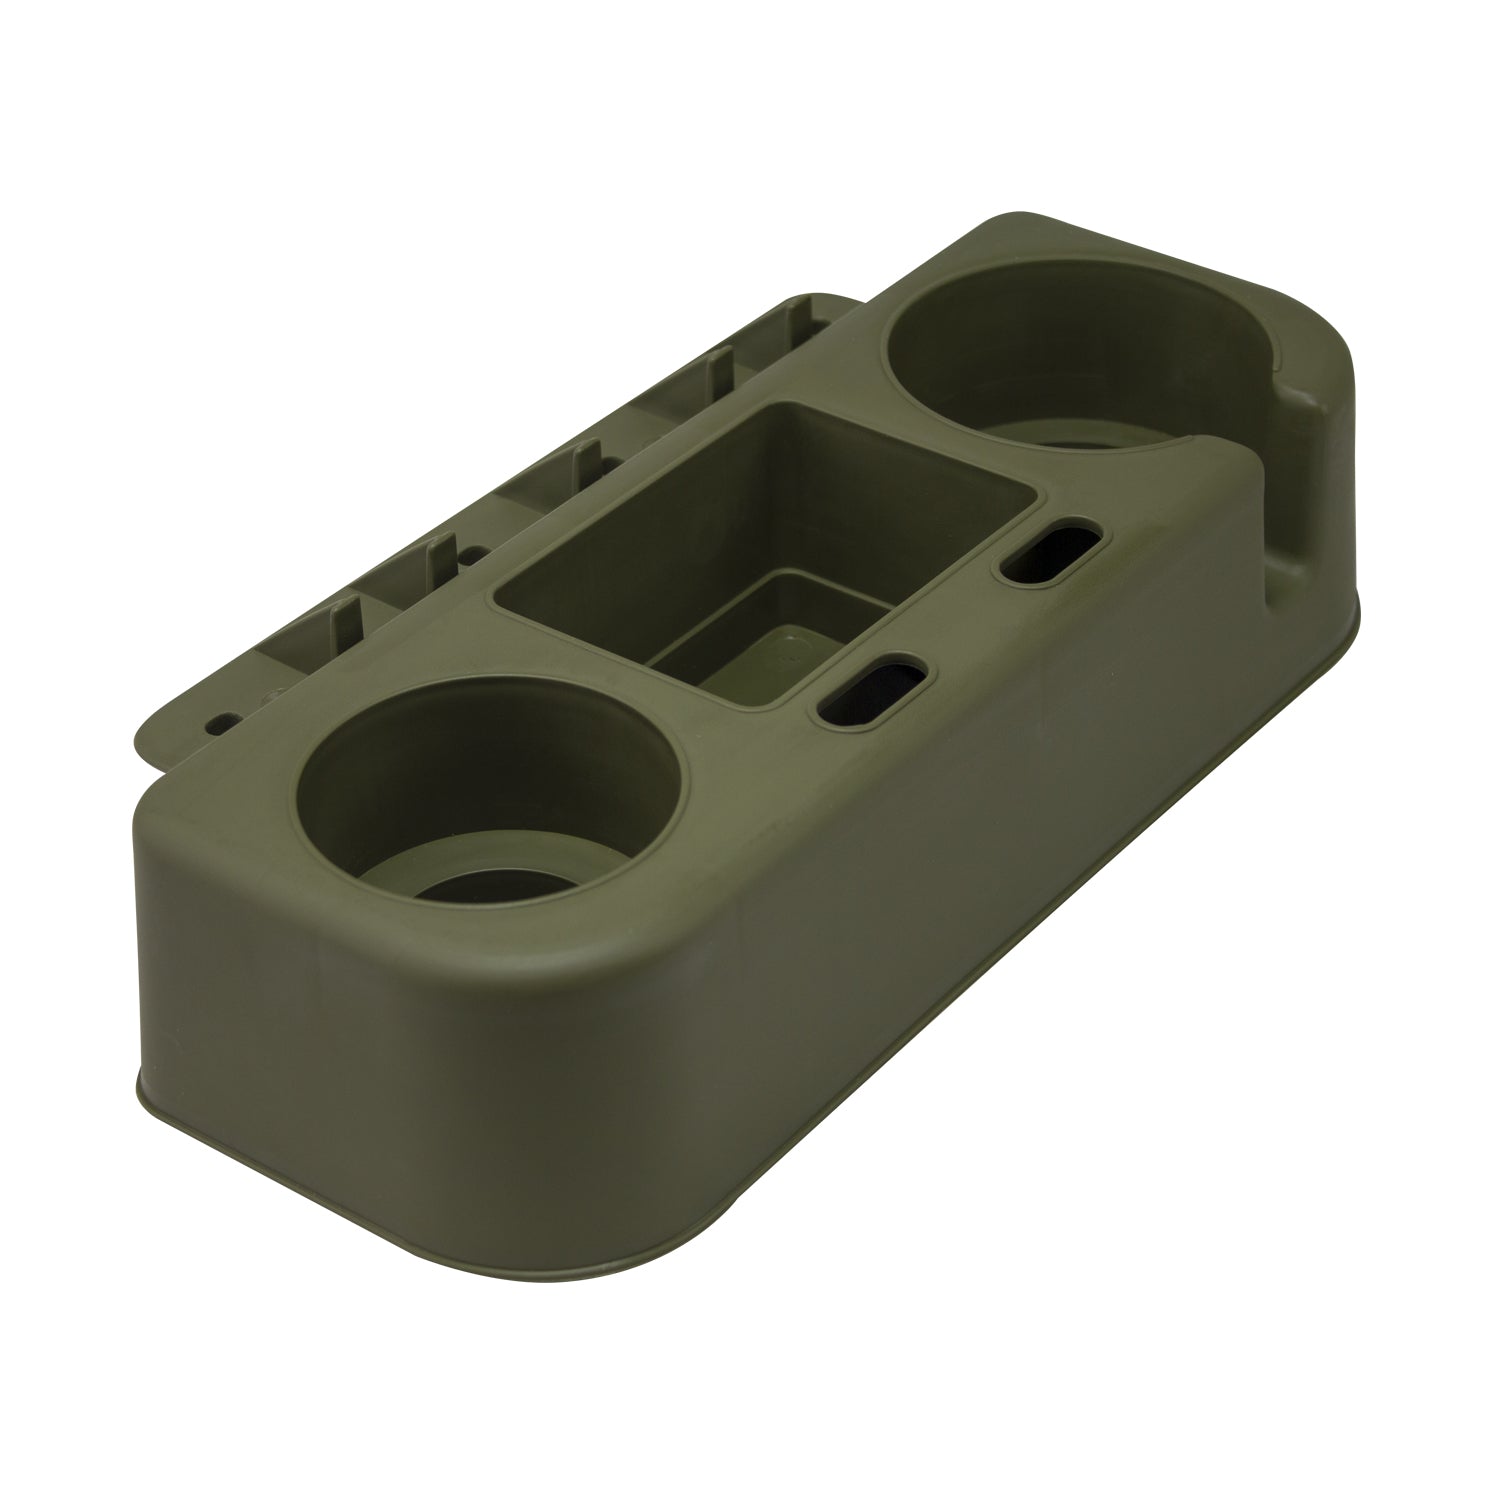 Wise 8wd1096-713 Green Seat Caddy Gear Holder